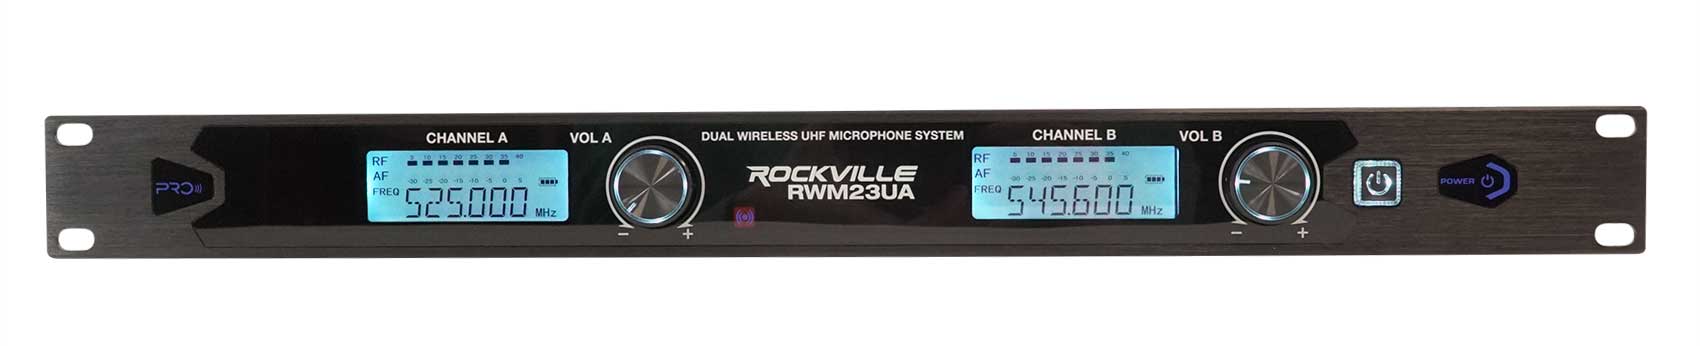 Rockville RWM23UA UHF Wireless Pro Rack Mount Dual Microphone System/20 Channel - image 2 of 9